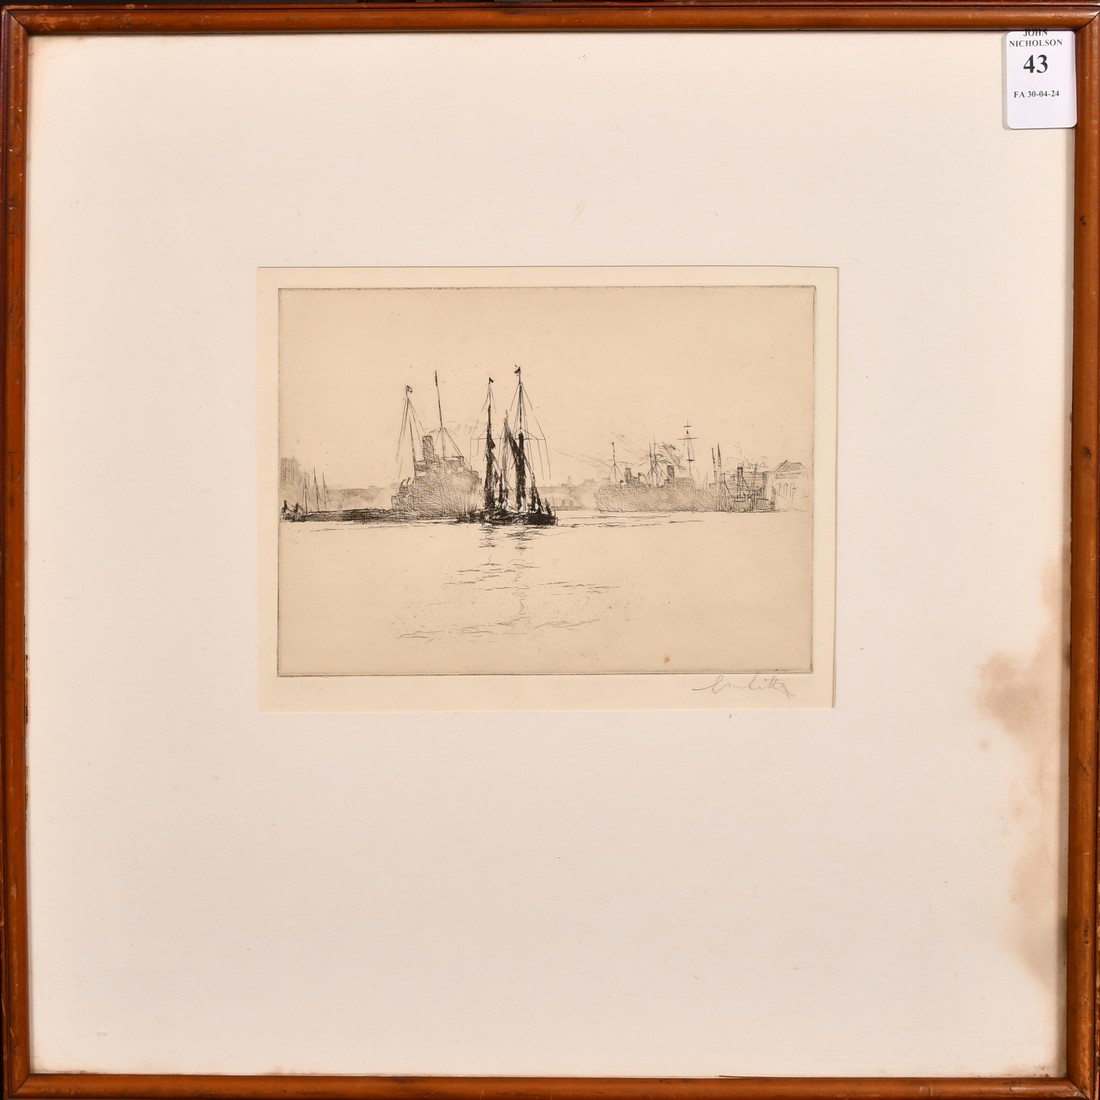 Sidney McKenzie Litten, shipping on a broad river, etching, signed in pencil, plate size 5" x 7" ( - Image 2 of 4